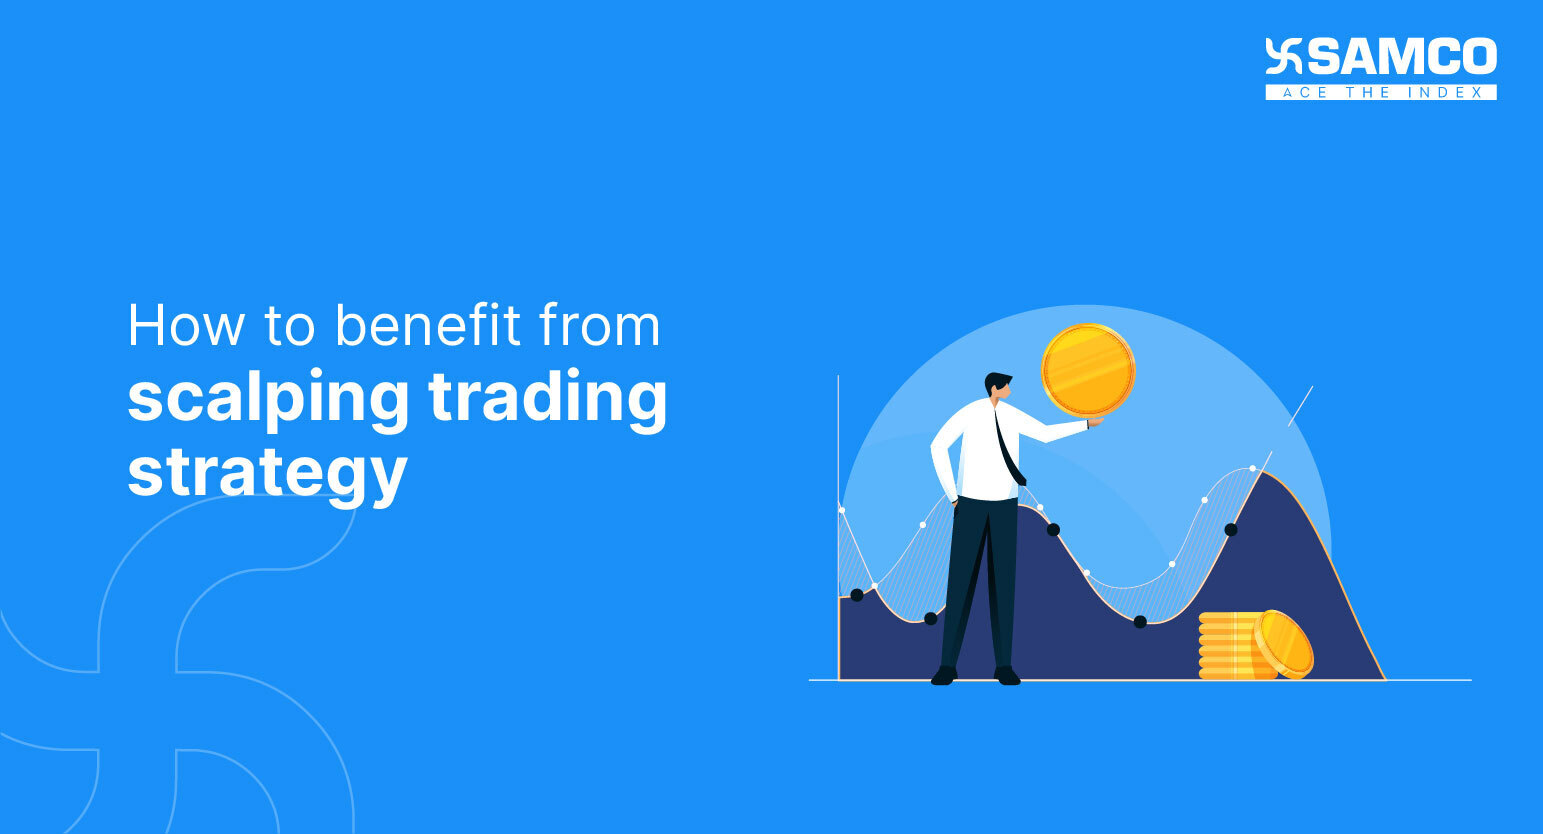 How to Benefit from Scalping Trading Strategy?